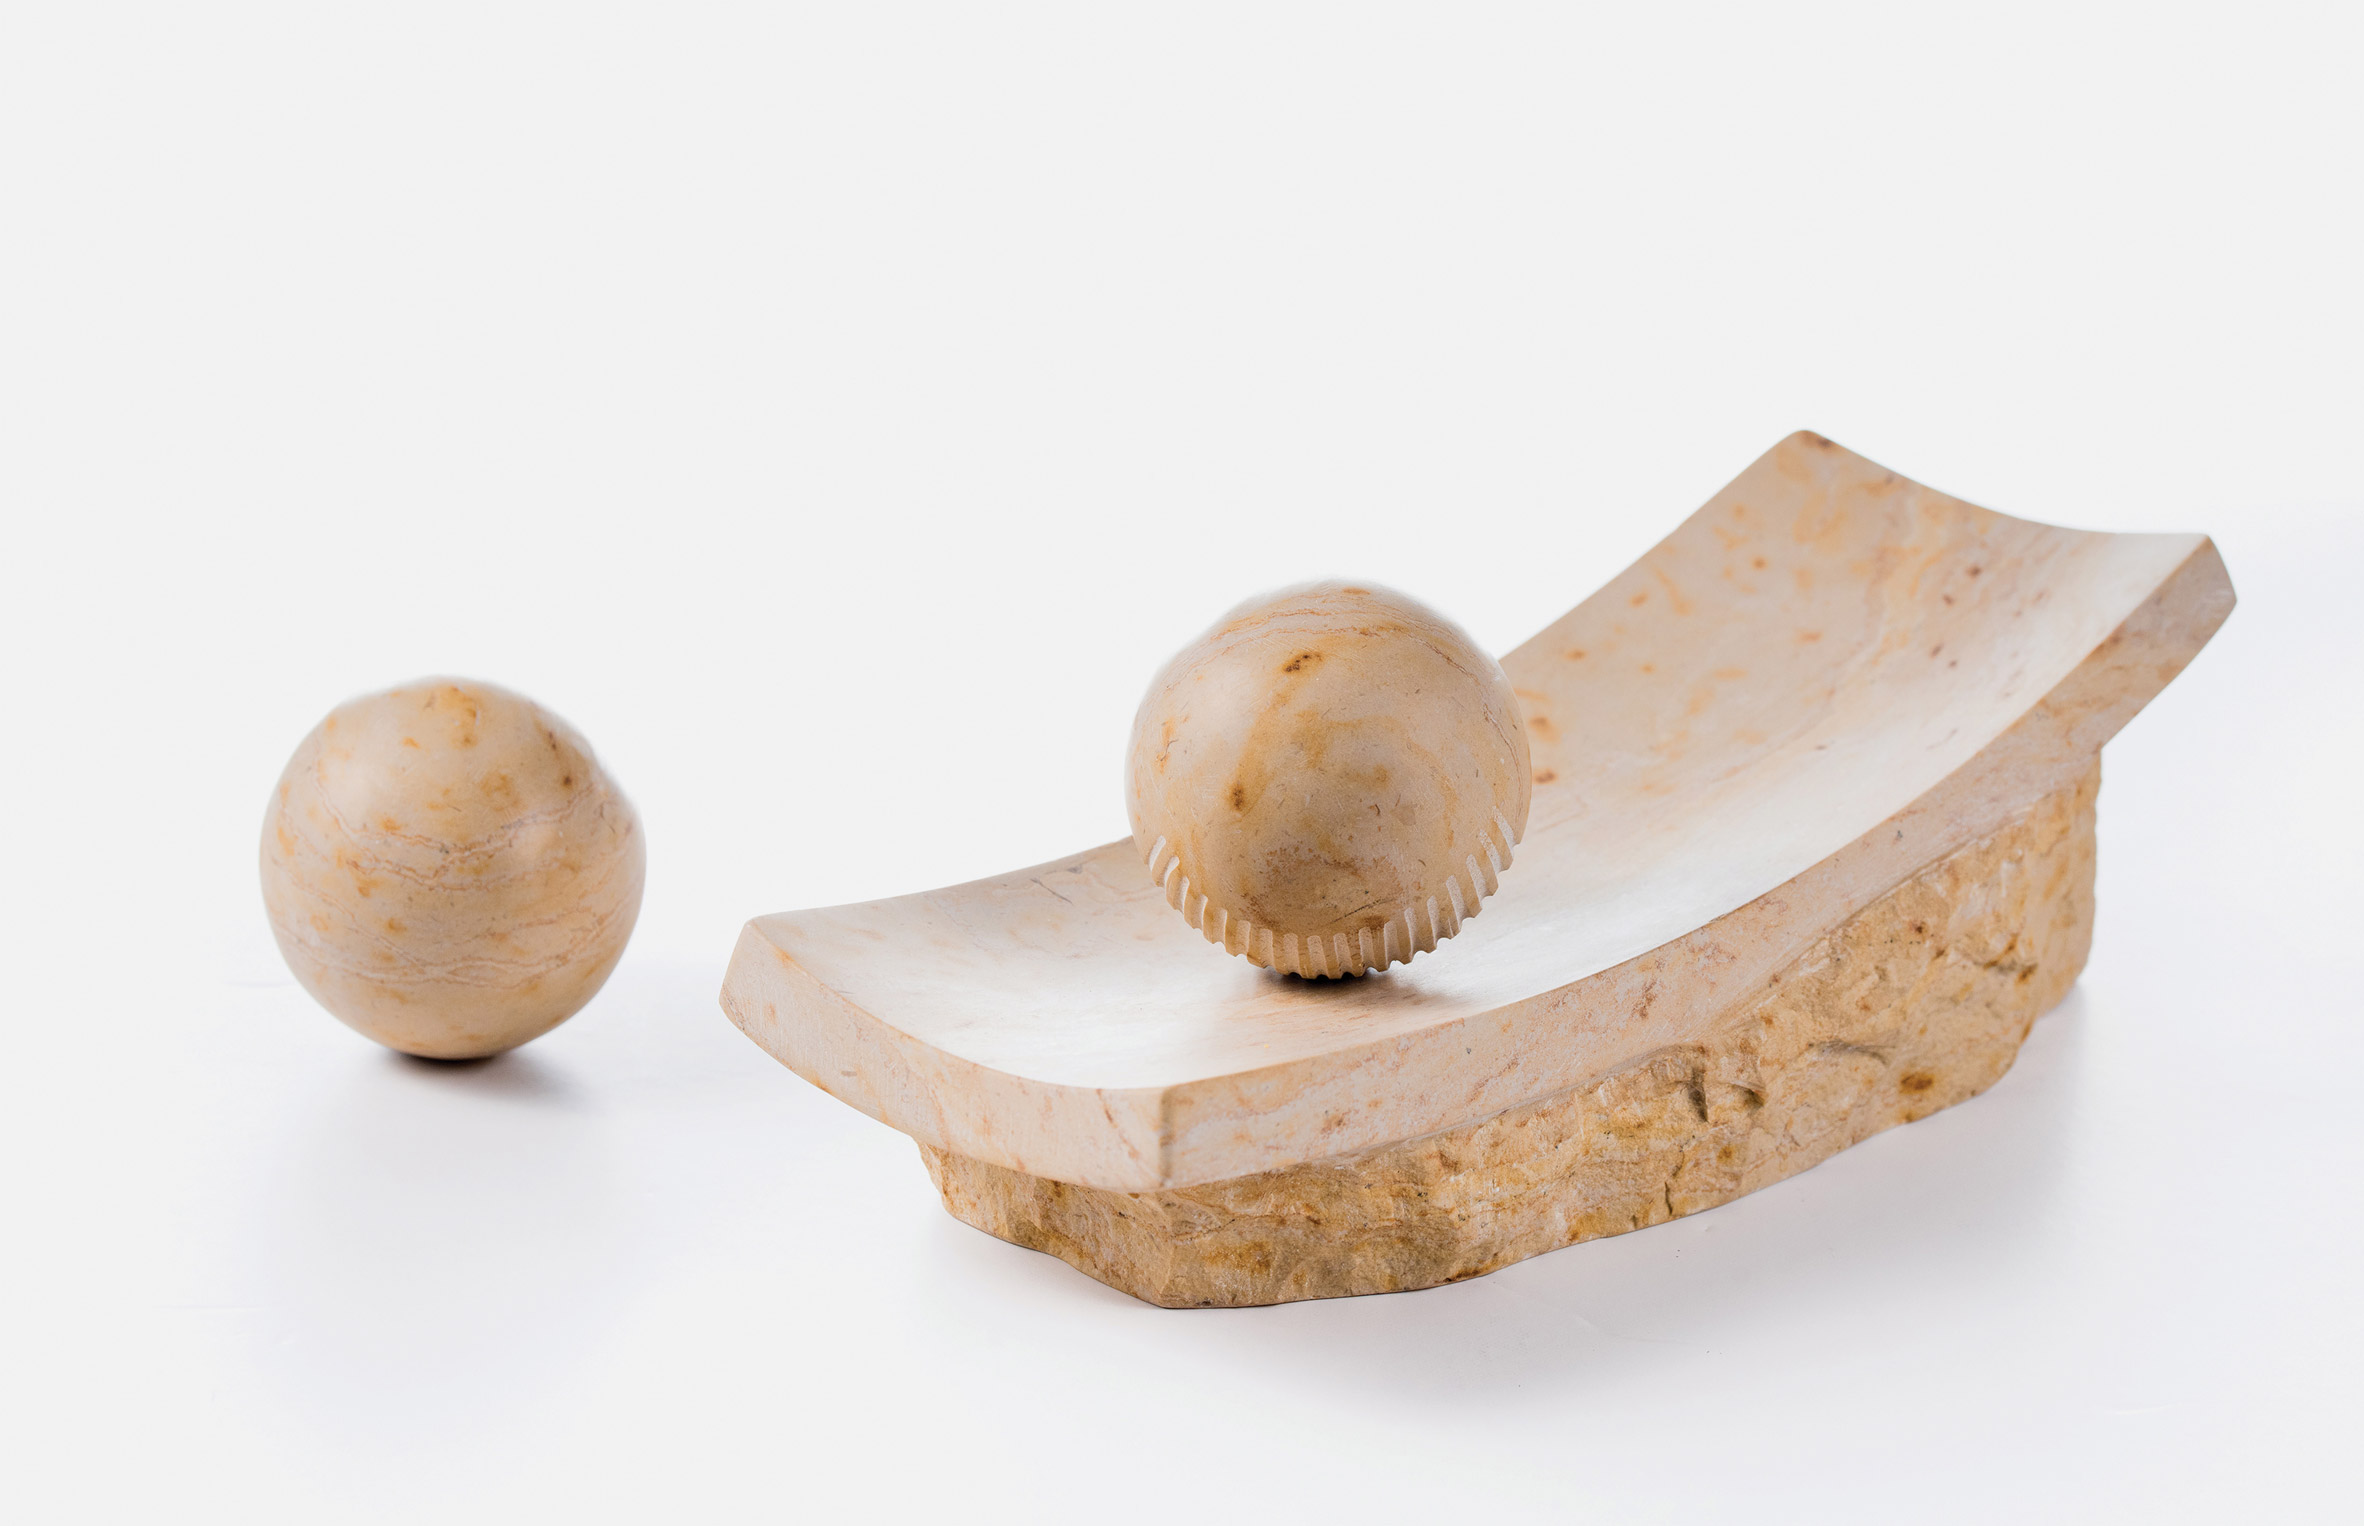 The mortar and pestle featured in Amalia Shem Tov's "Roots" cooking utensil collection.